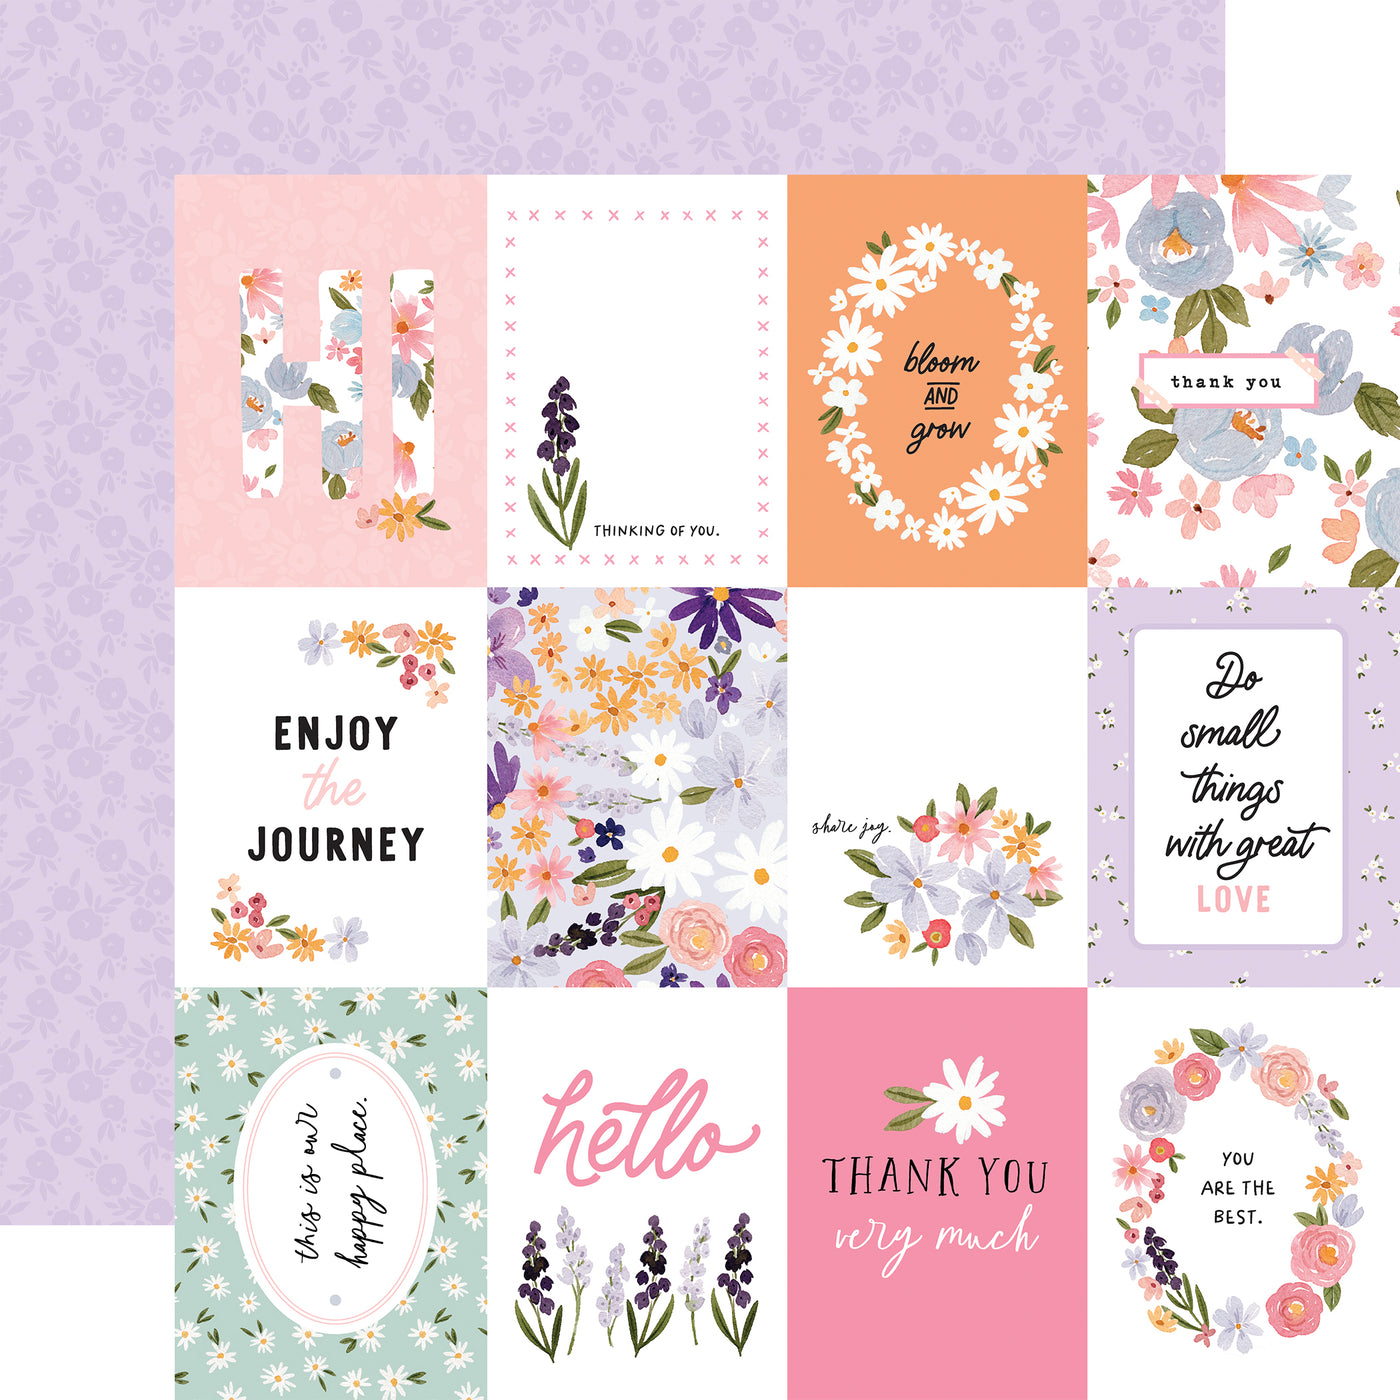 The front side of this paper has 12 journaling cards with floral patterns in shades of pink, purple, yellow, and mint green. The reverse side is purple with small flowers throughout. 